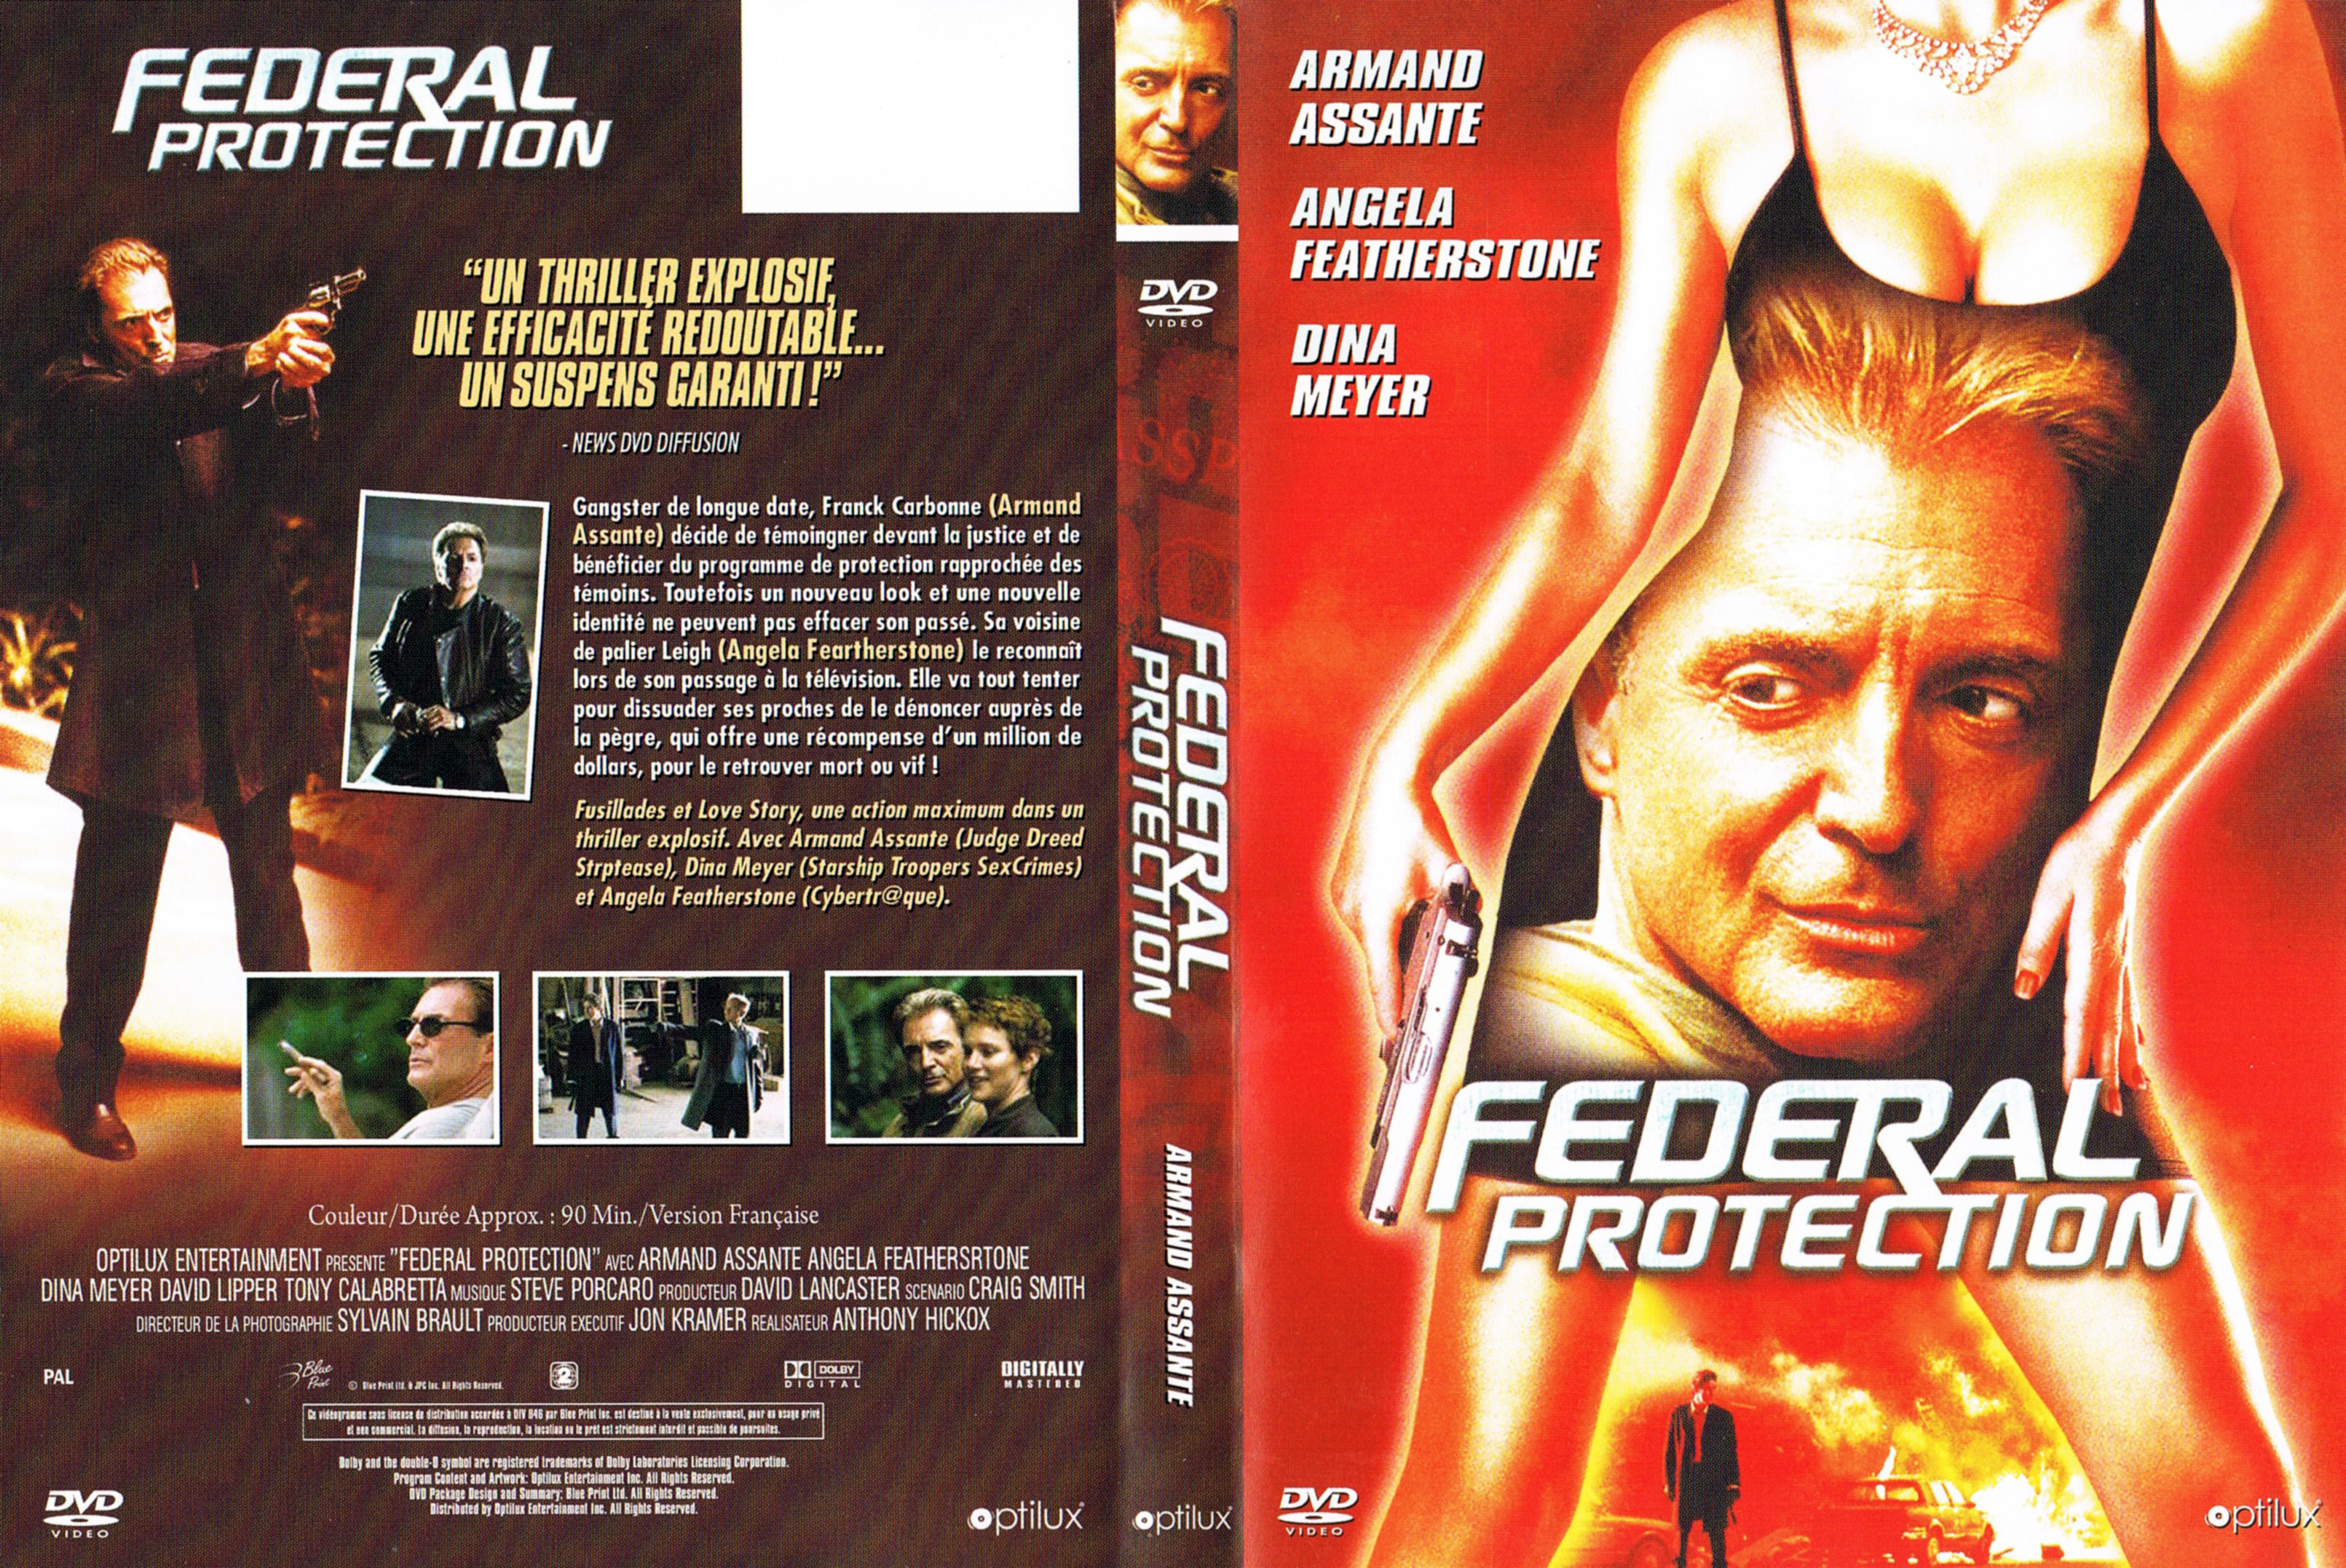 Jaquette DVD Federal protection